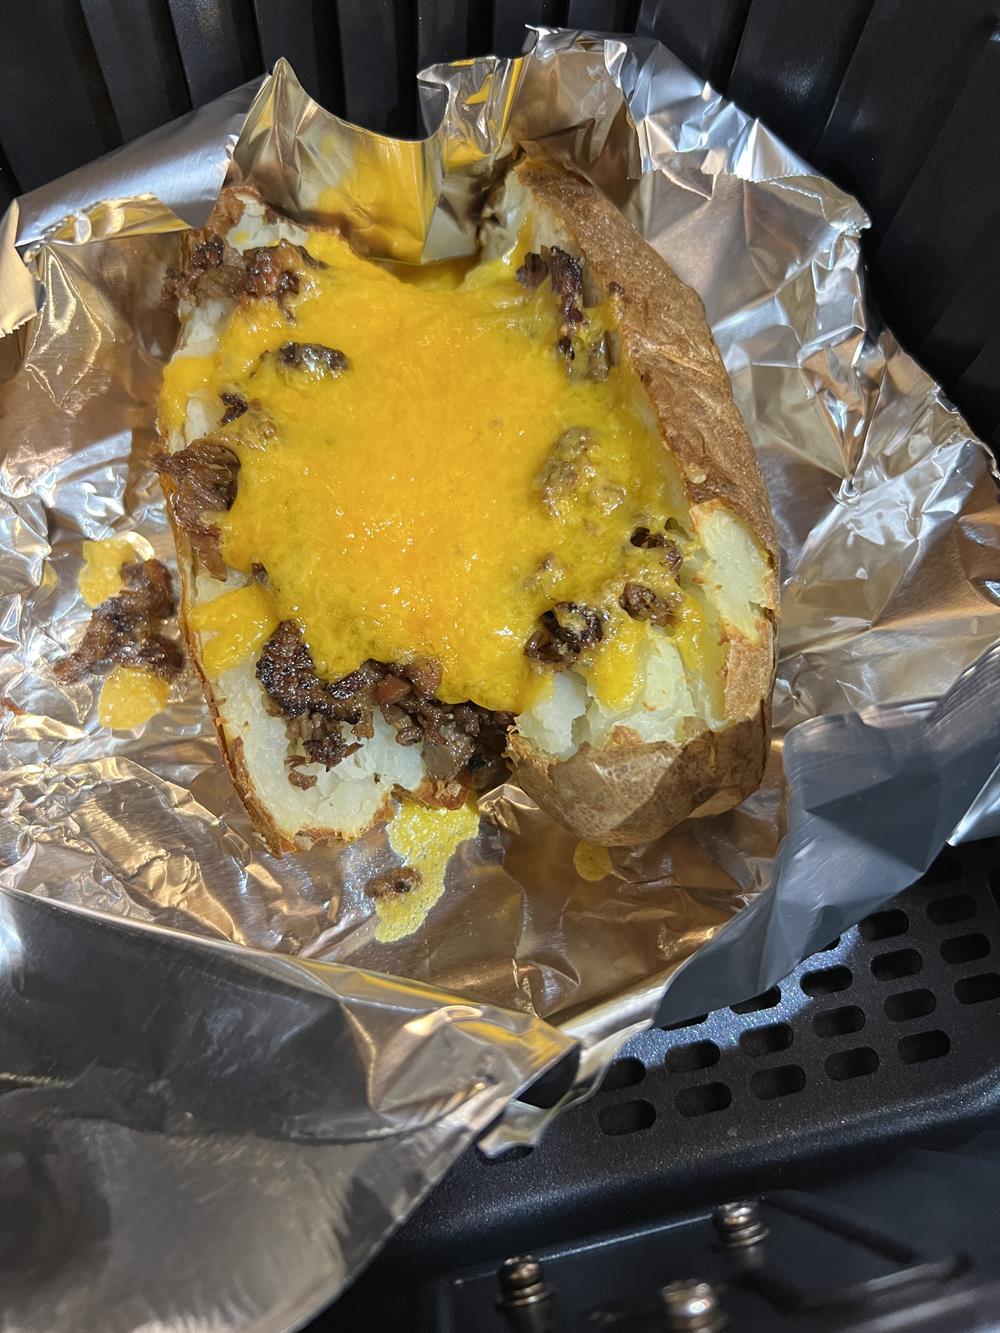 baked potato with cheese and bbq meat on top